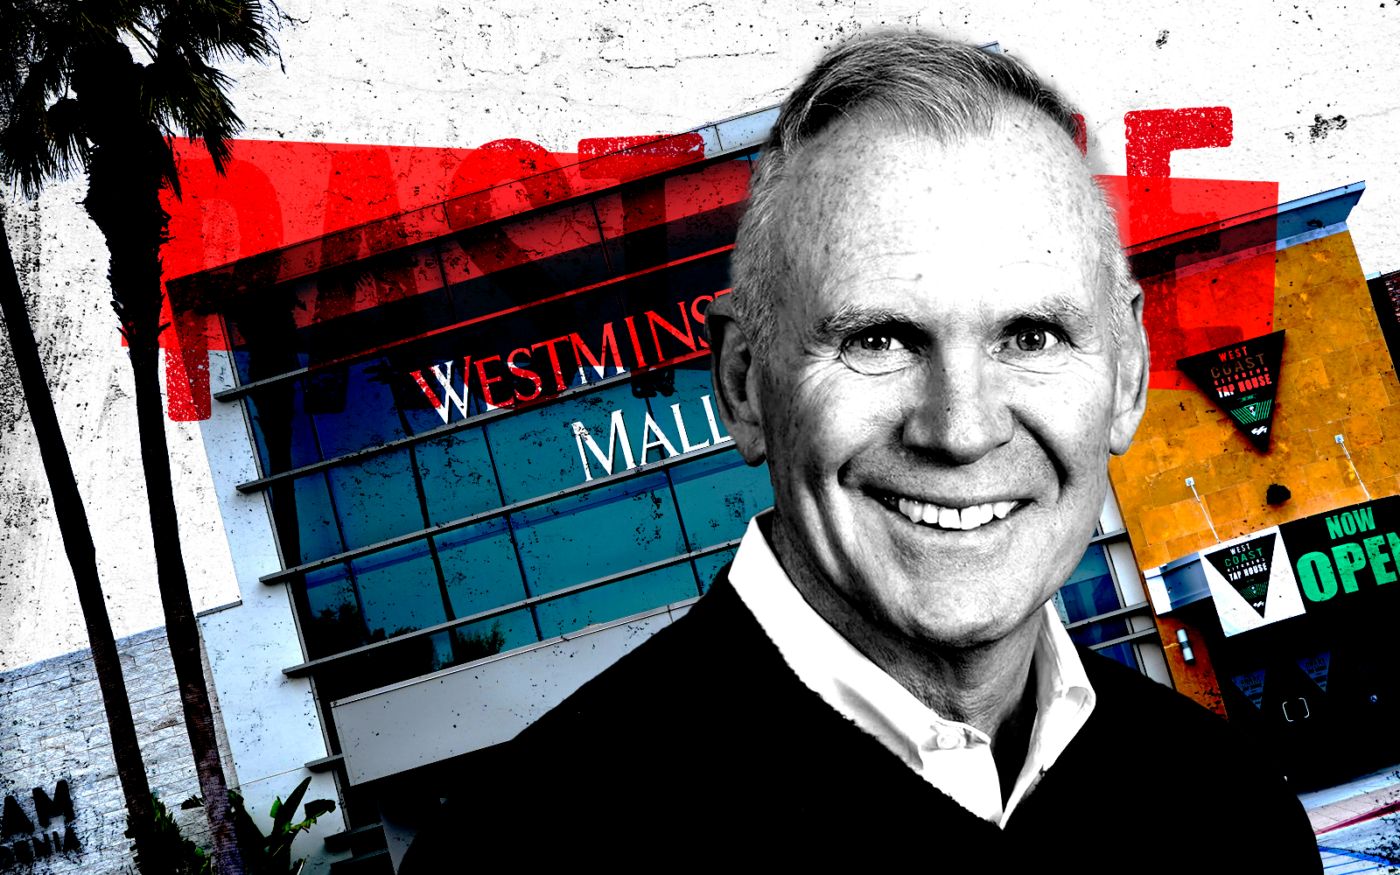 Washington Prime Faces Default on Westminster Mall Loan